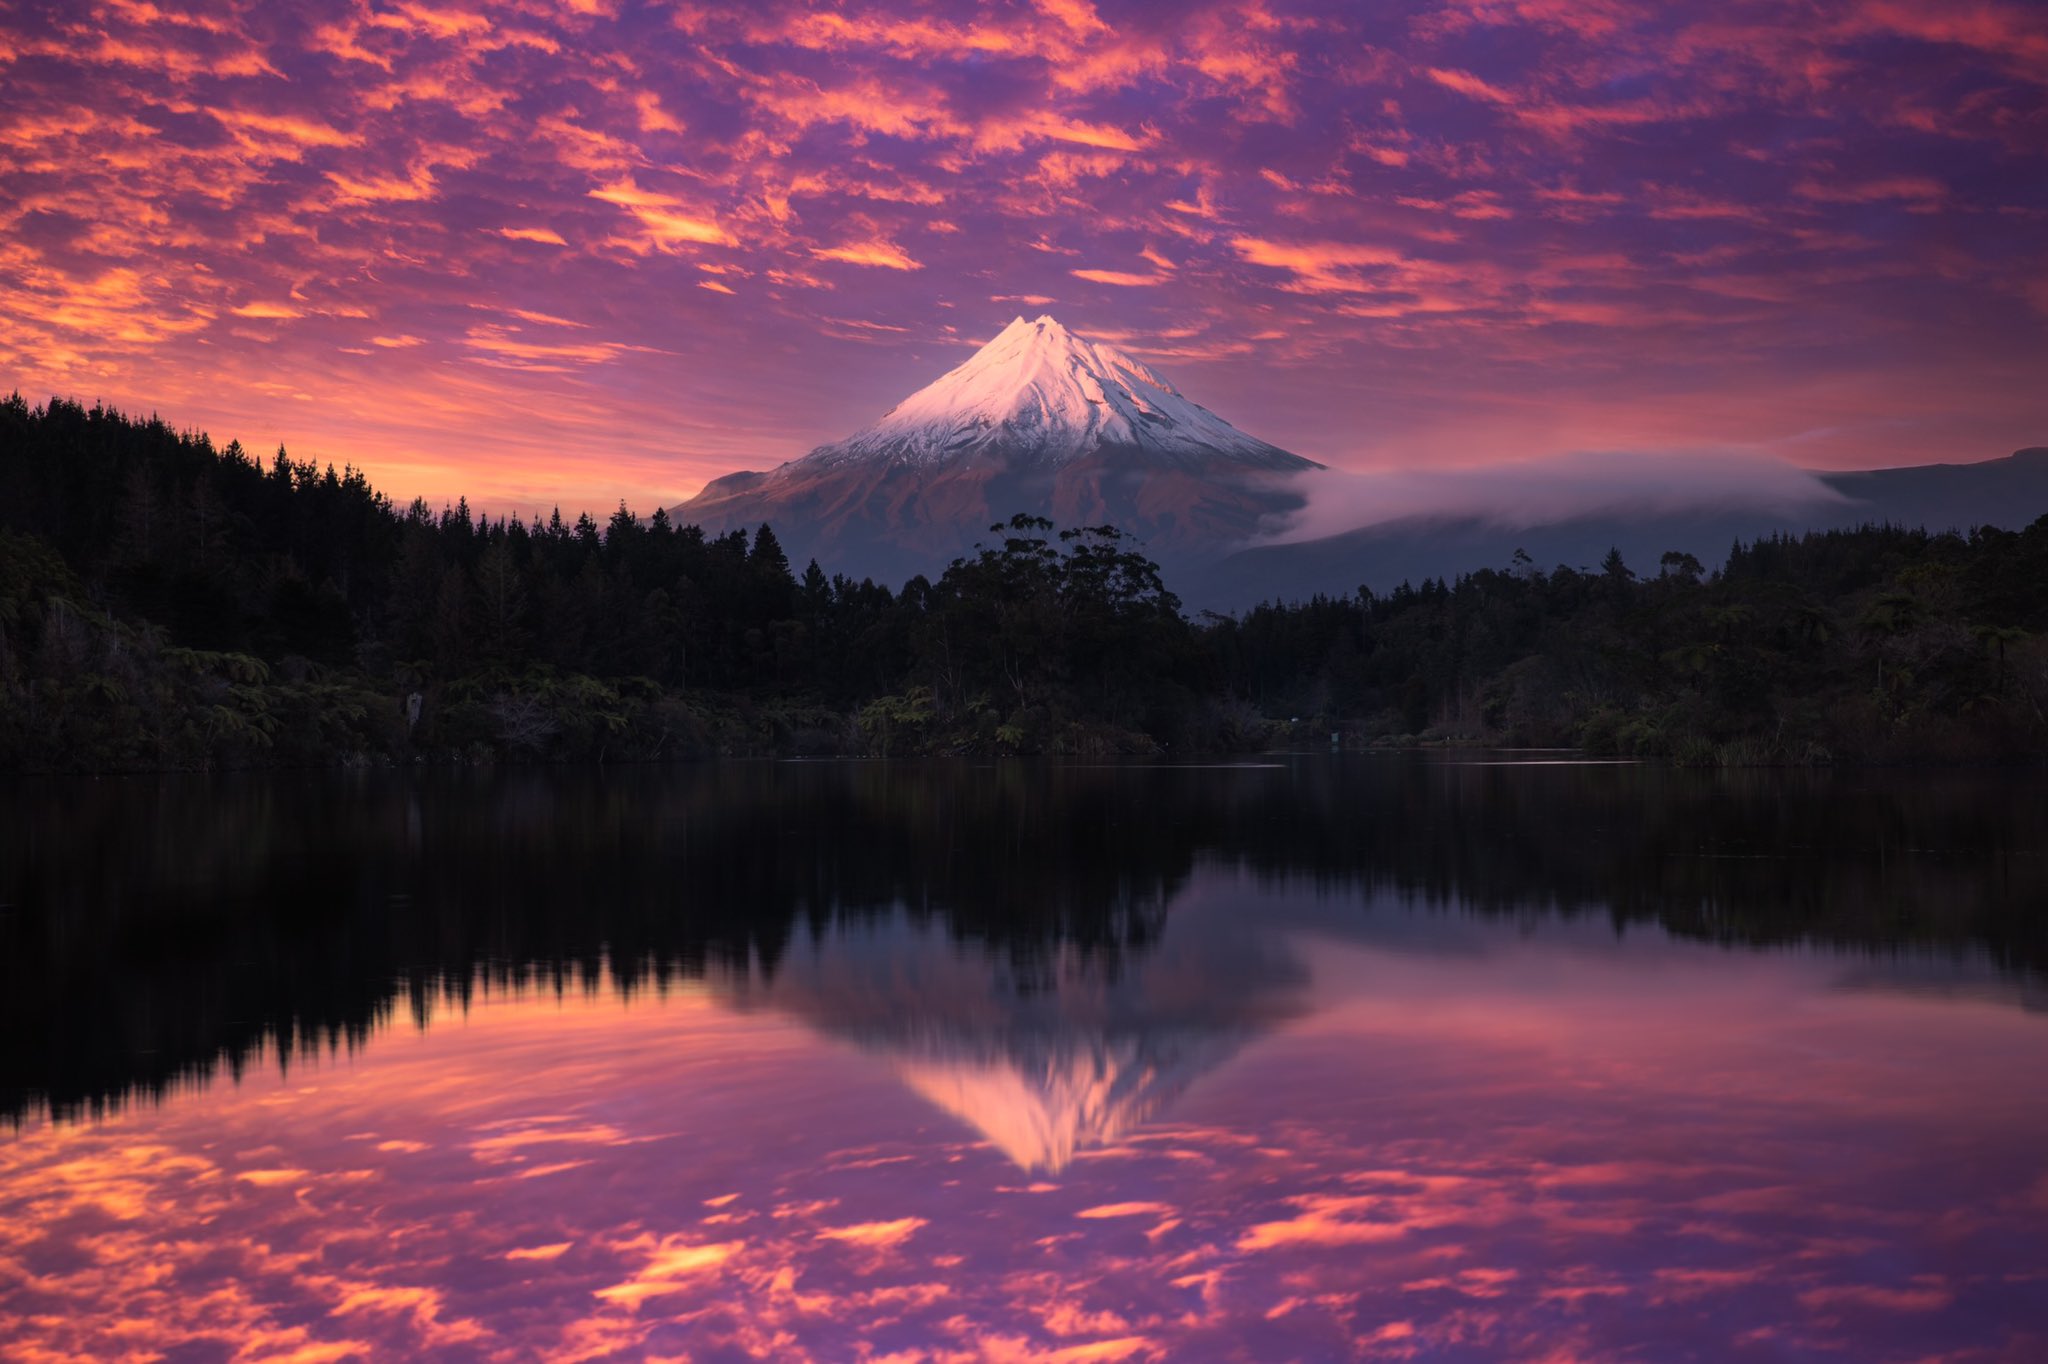 General 2048x1364 Rach Stewart nature mountains lake reflection forest trees sky clouds purple